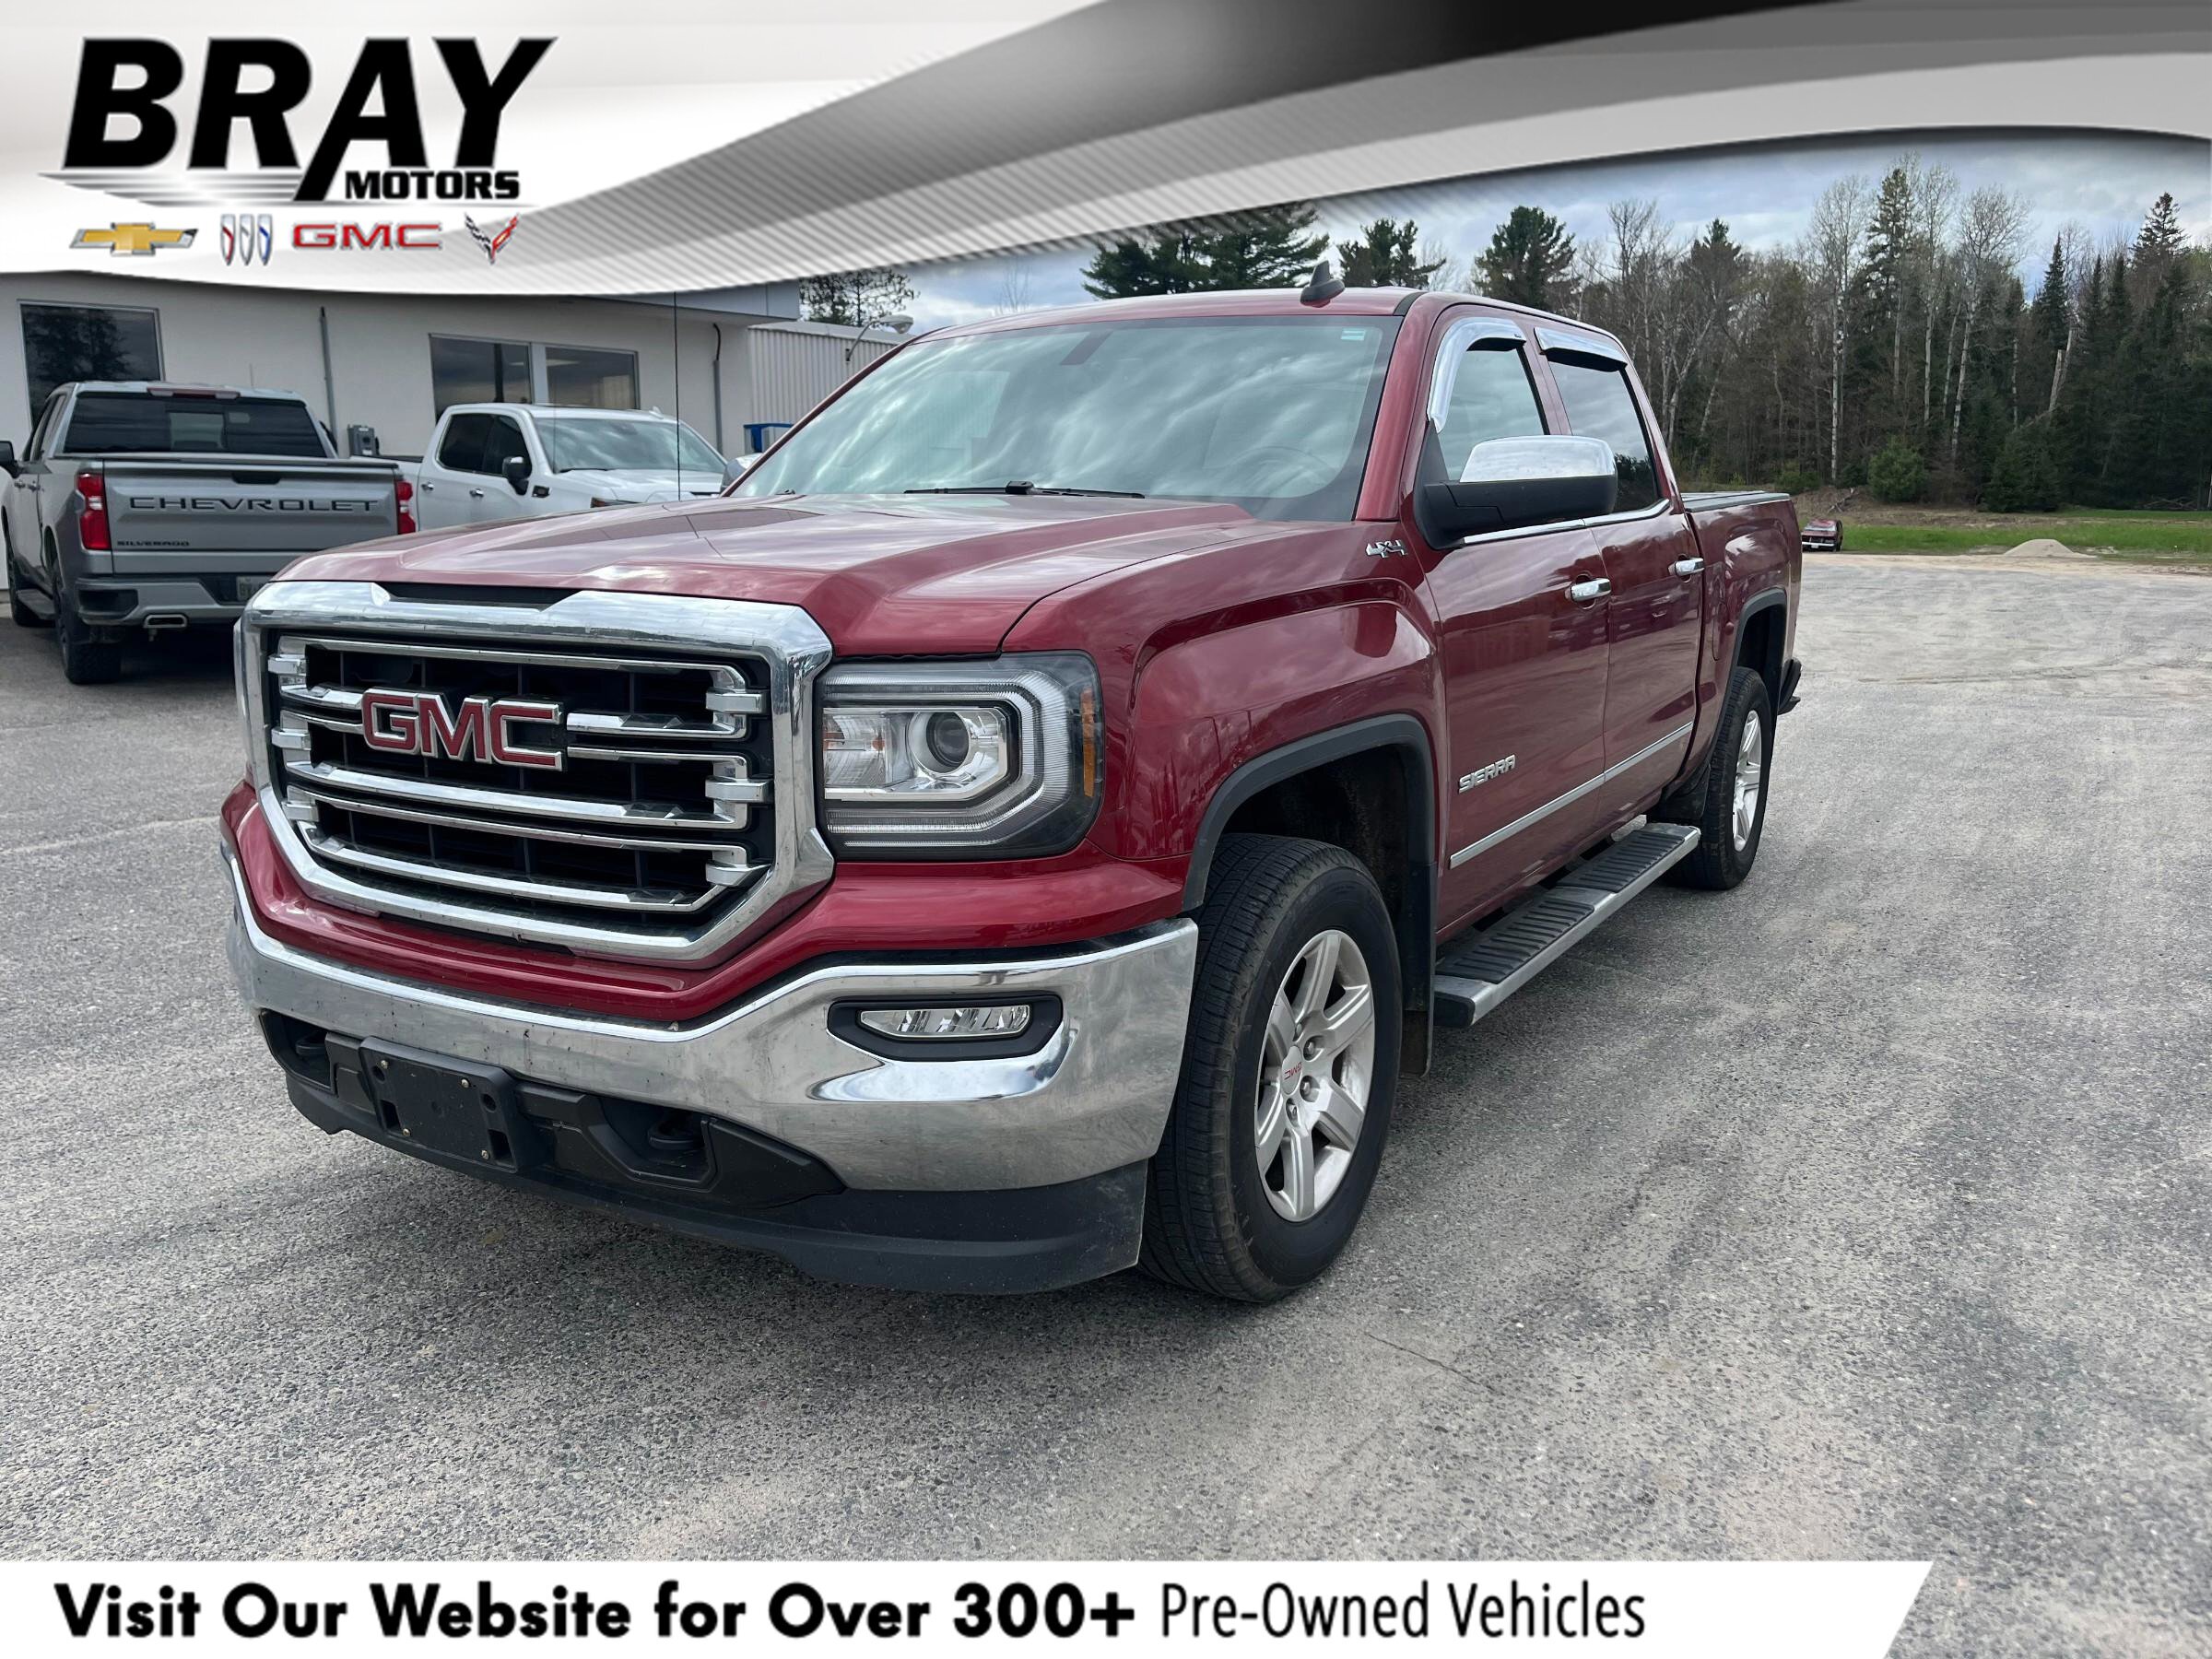 2018 GMC Sierra 1500 SLT CERTIFIED PREOWNED | 1-OWNER | CLEAN CARFAX